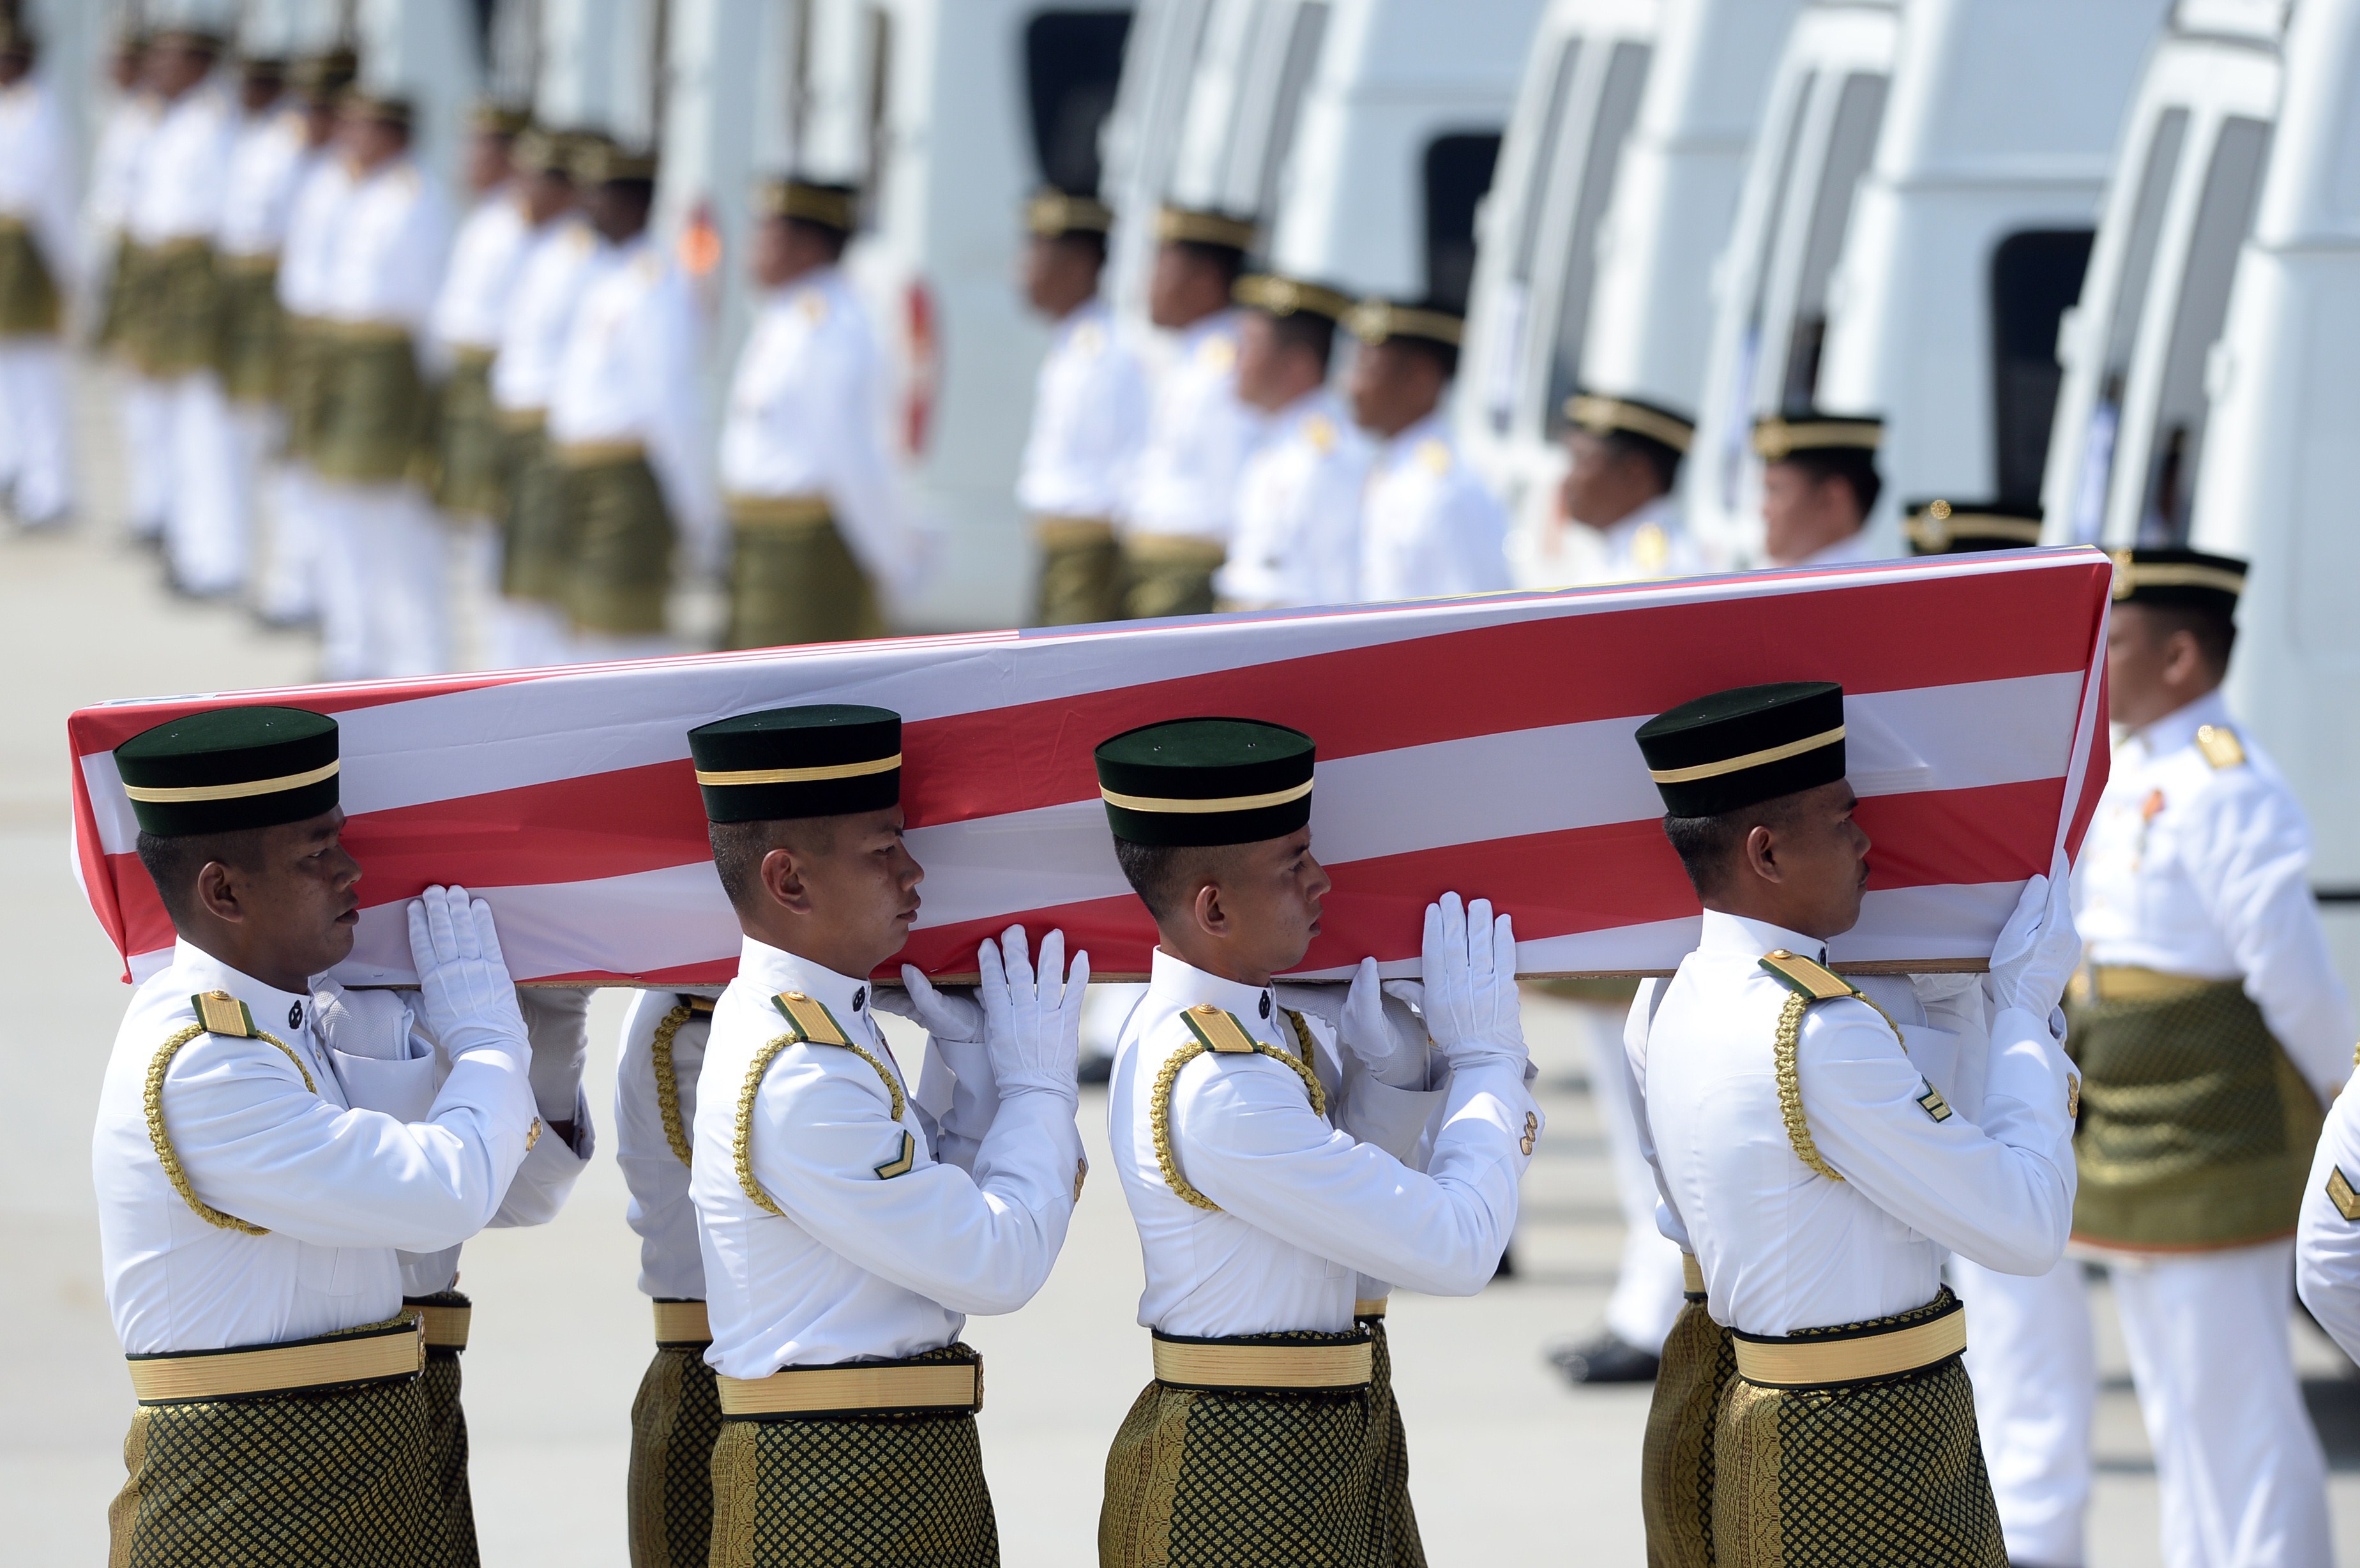 Soldiers carry a coffin with the remains of a Malaysian victim from Malaysia Airlines Flight 17, which crashed in Ukraine, during a ceremony at Kuala Lumpur International Airport on Aug. 22, 2014 (Manan Vatsyayana—AFP/Getty Images)